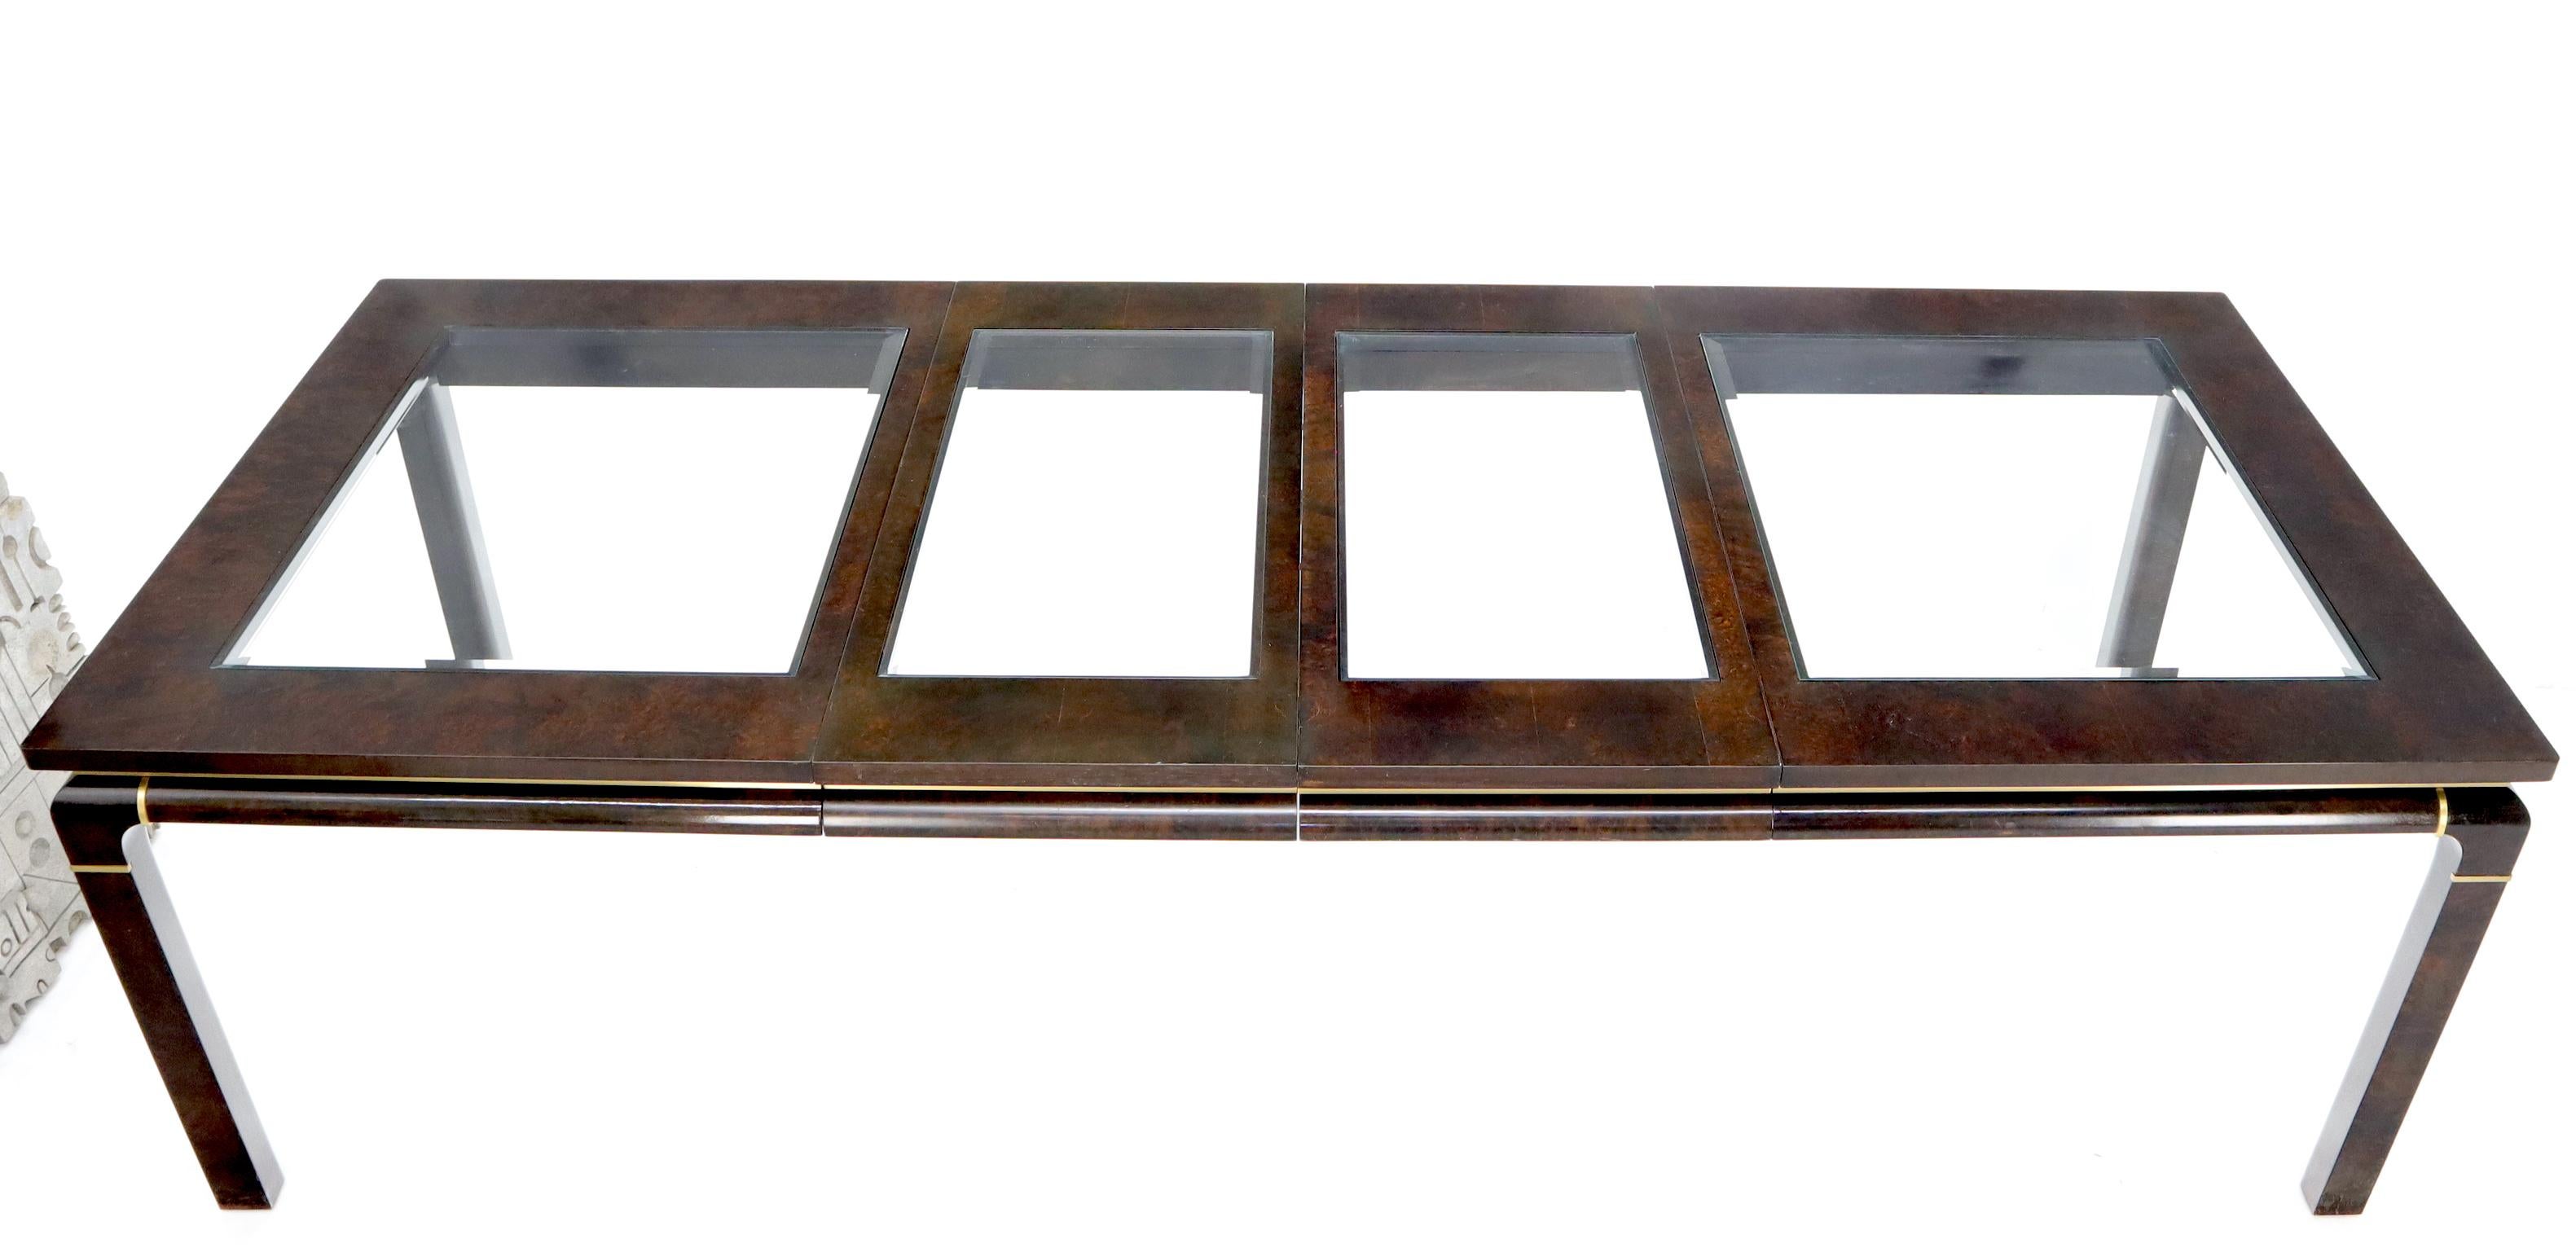 Dark Burl Wood Glass Top Inserts Two Extension boards Leaves Dining Table For Sale 7